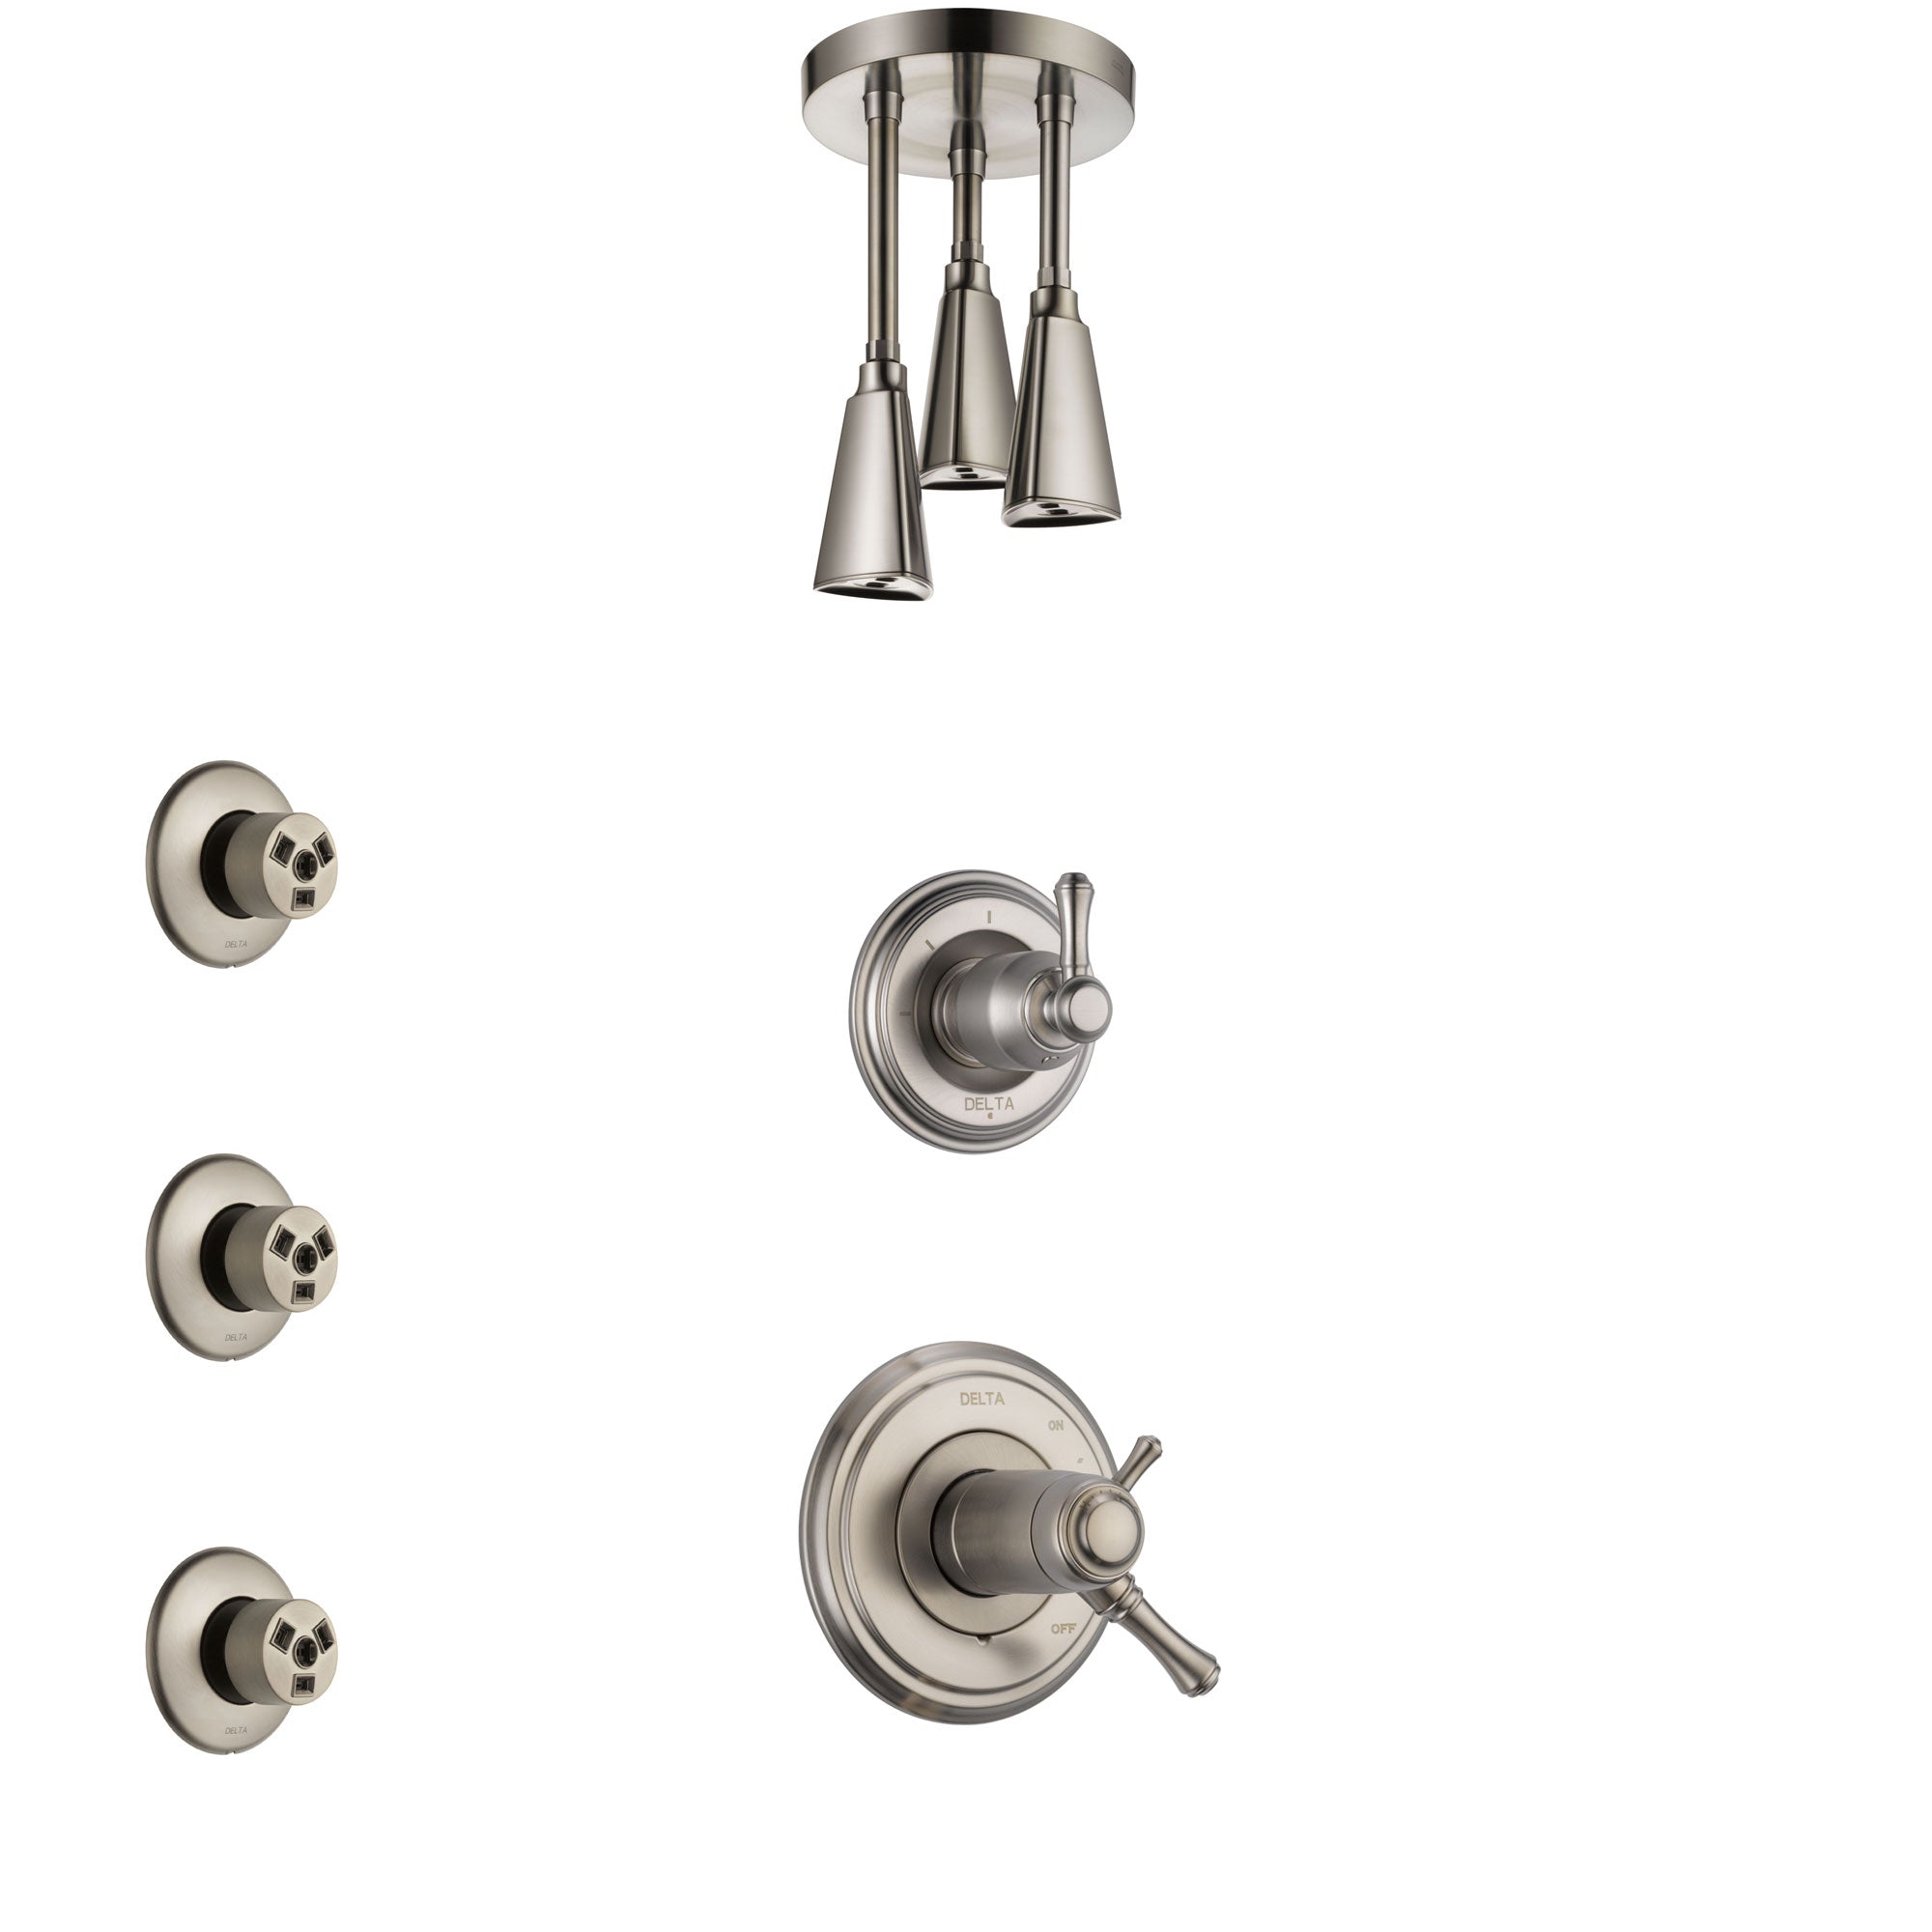 Delta Cassidy Dual Thermostatic Control Handle Stainless Steel Finish Shower System, Diverter, Ceiling Mount Showerhead, and 3 Body Sprays SS17T972SS4